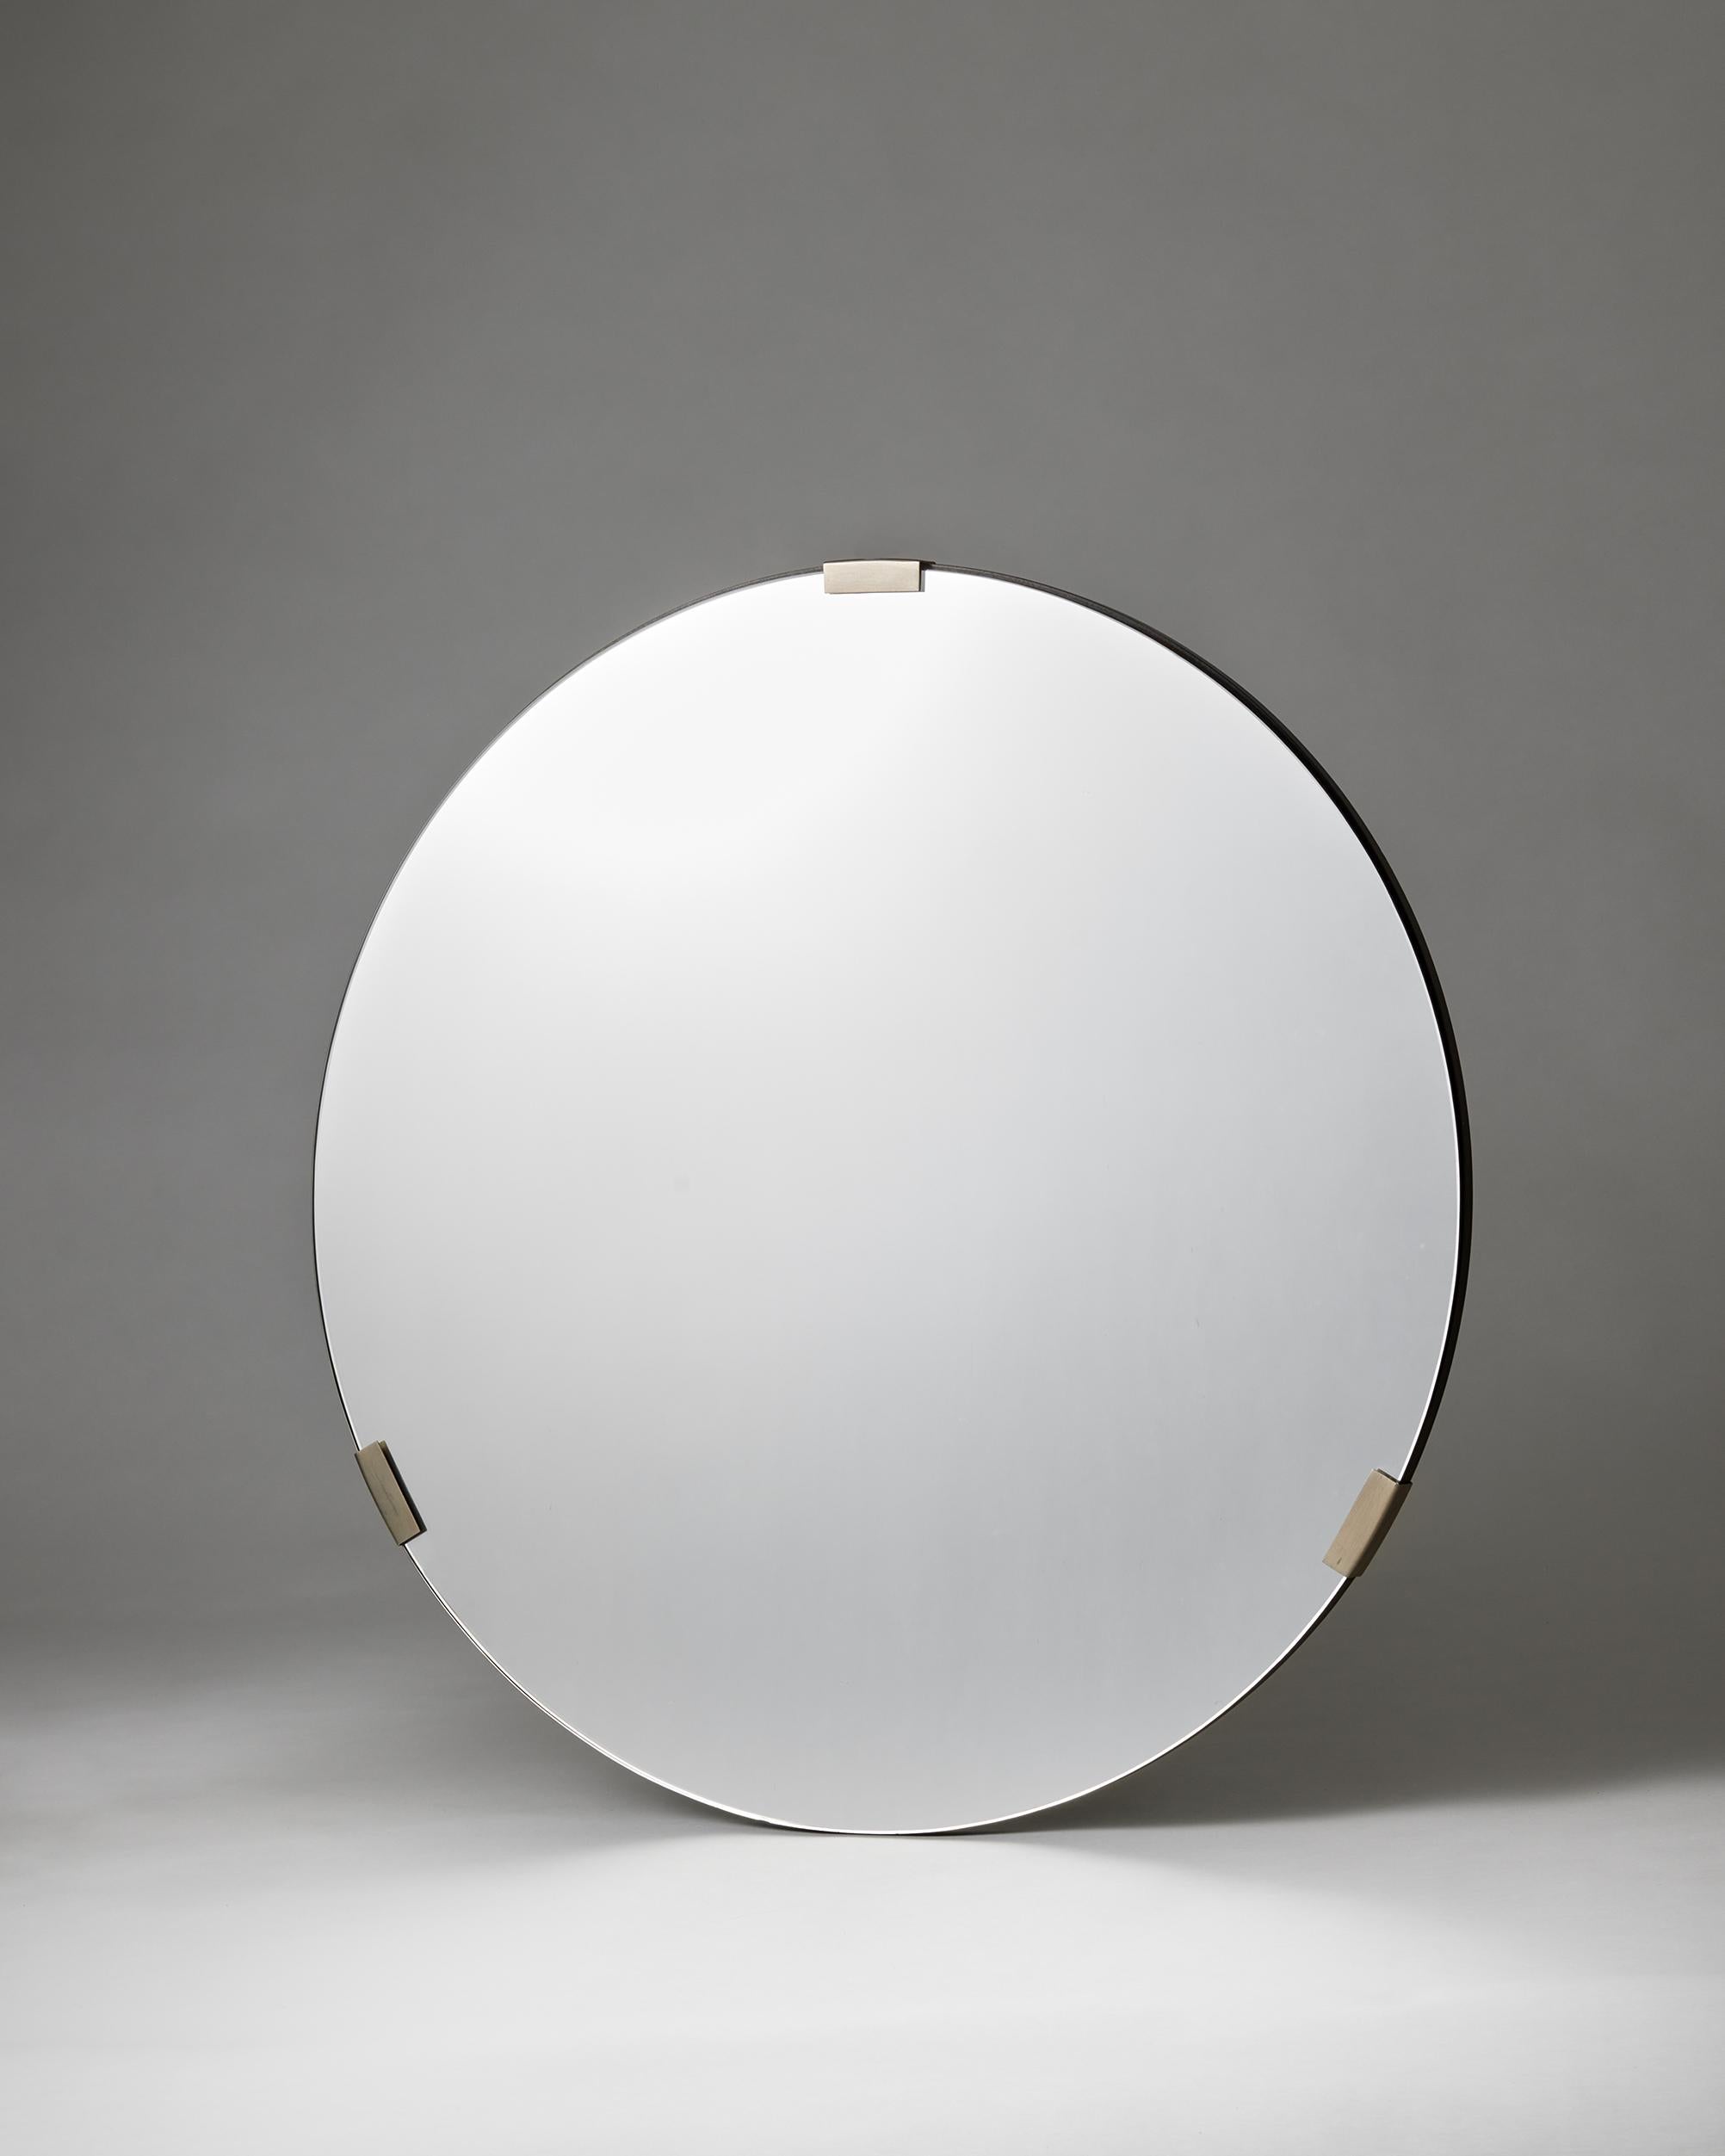 Mirror ‘Record’ designed by Axel Einar Hjorth for Nordiska Kompaniet,
Sweden, 1930s.

Brushed steel and mirrored glass.

Stamped.

Diameter: 90 cm
Depth: 3 cm 

From 1927 to 1938, Axel-Einar Hjorth was the chief architect and designer at the